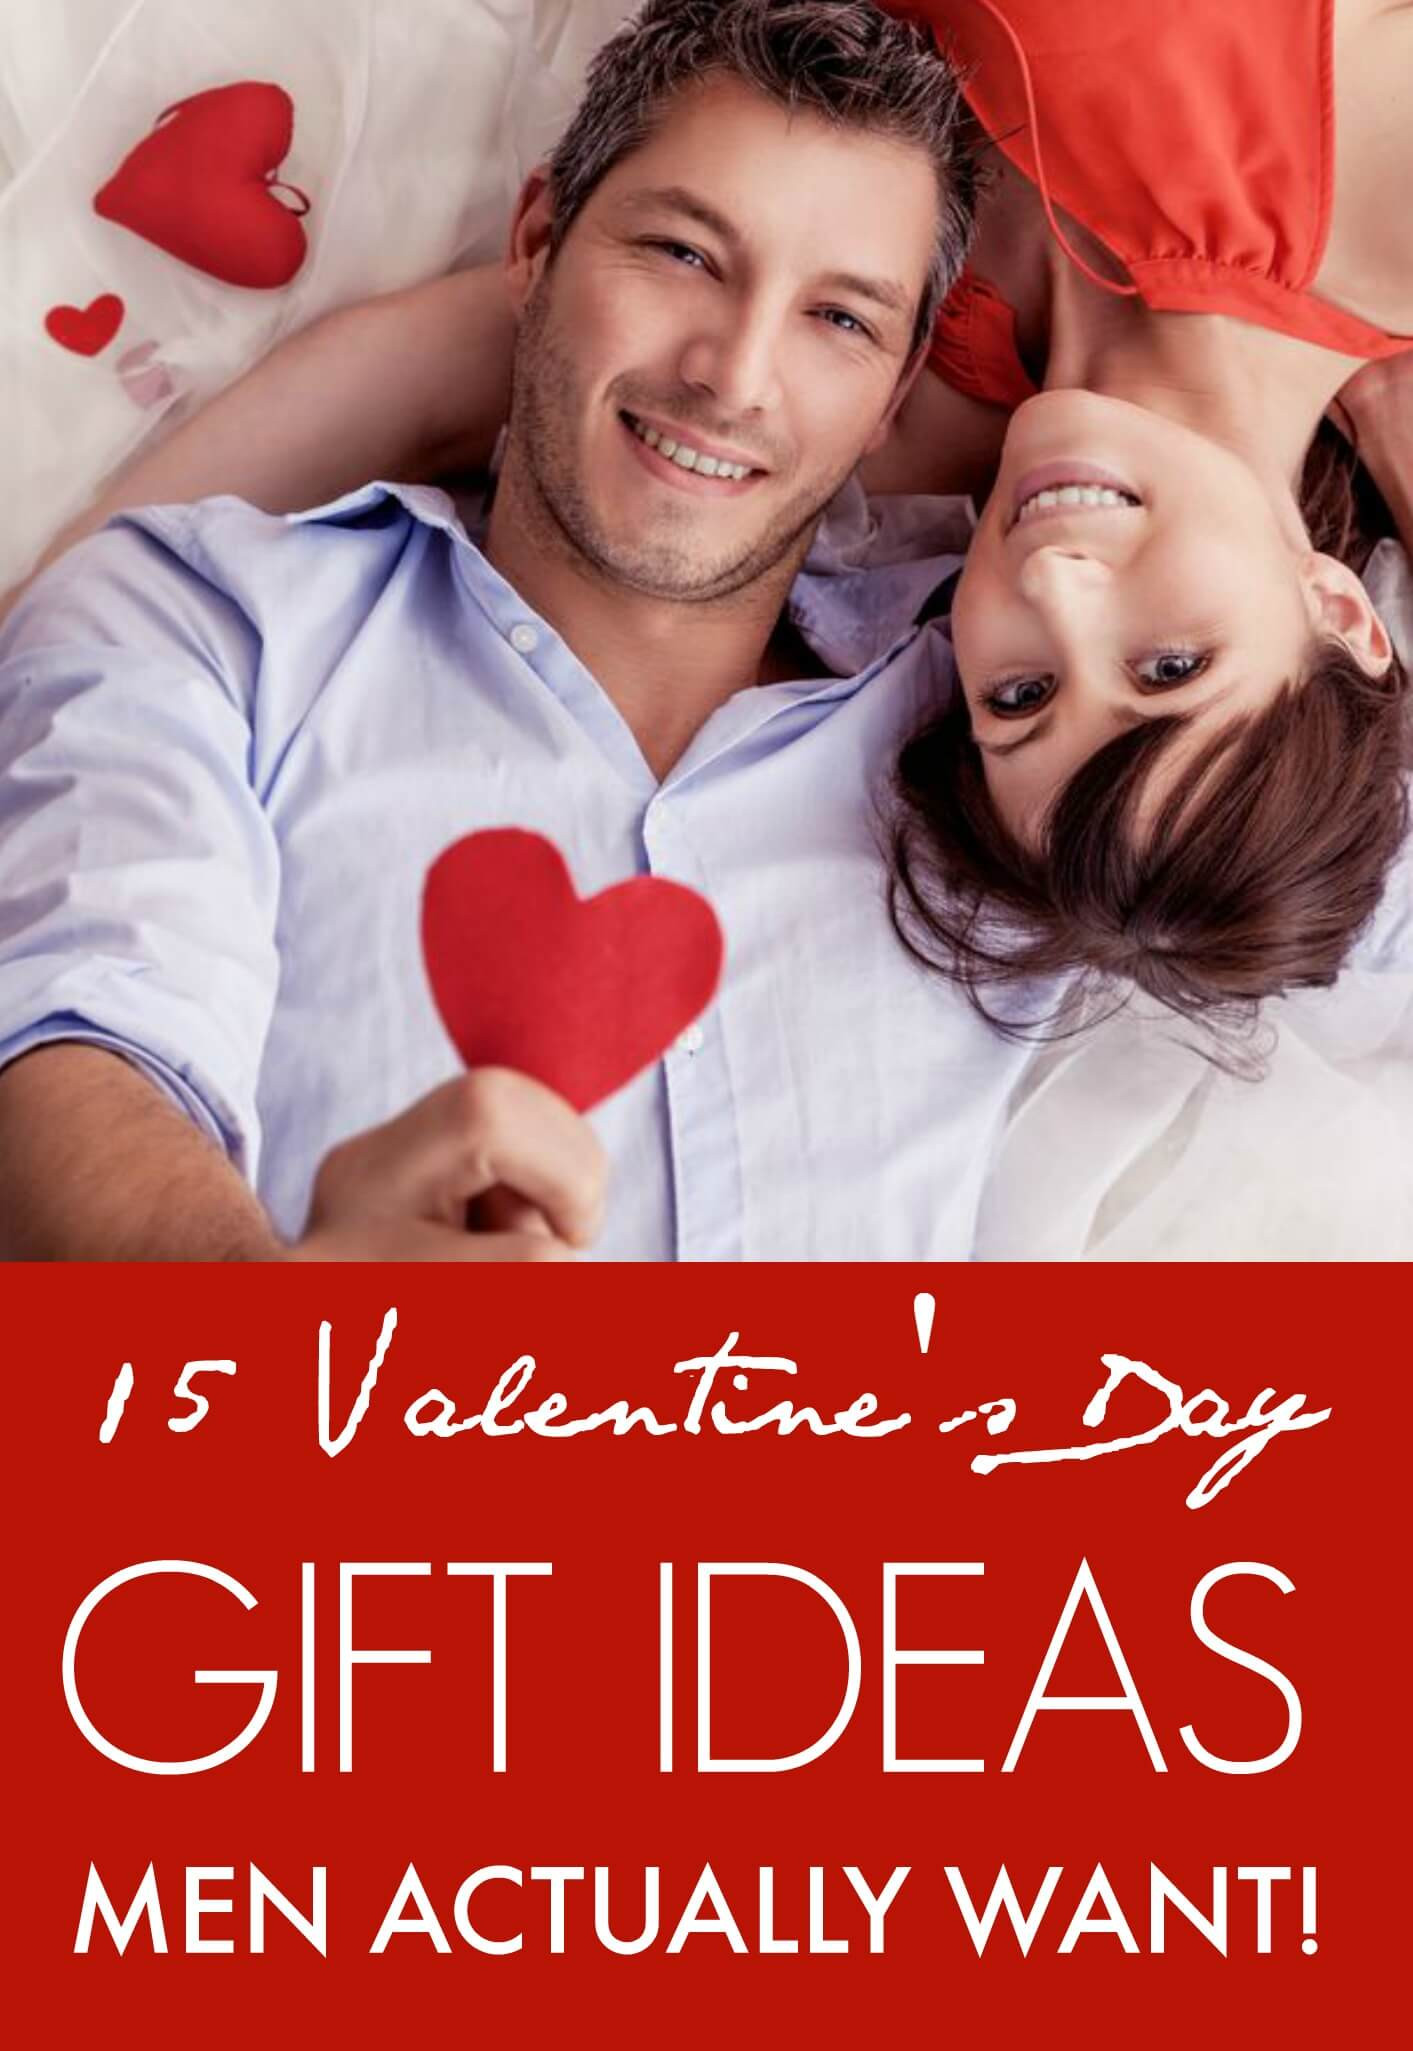 Male Valentine Gift Ideas
 15 Valentine’s Day Gift ideas Men Actually Want